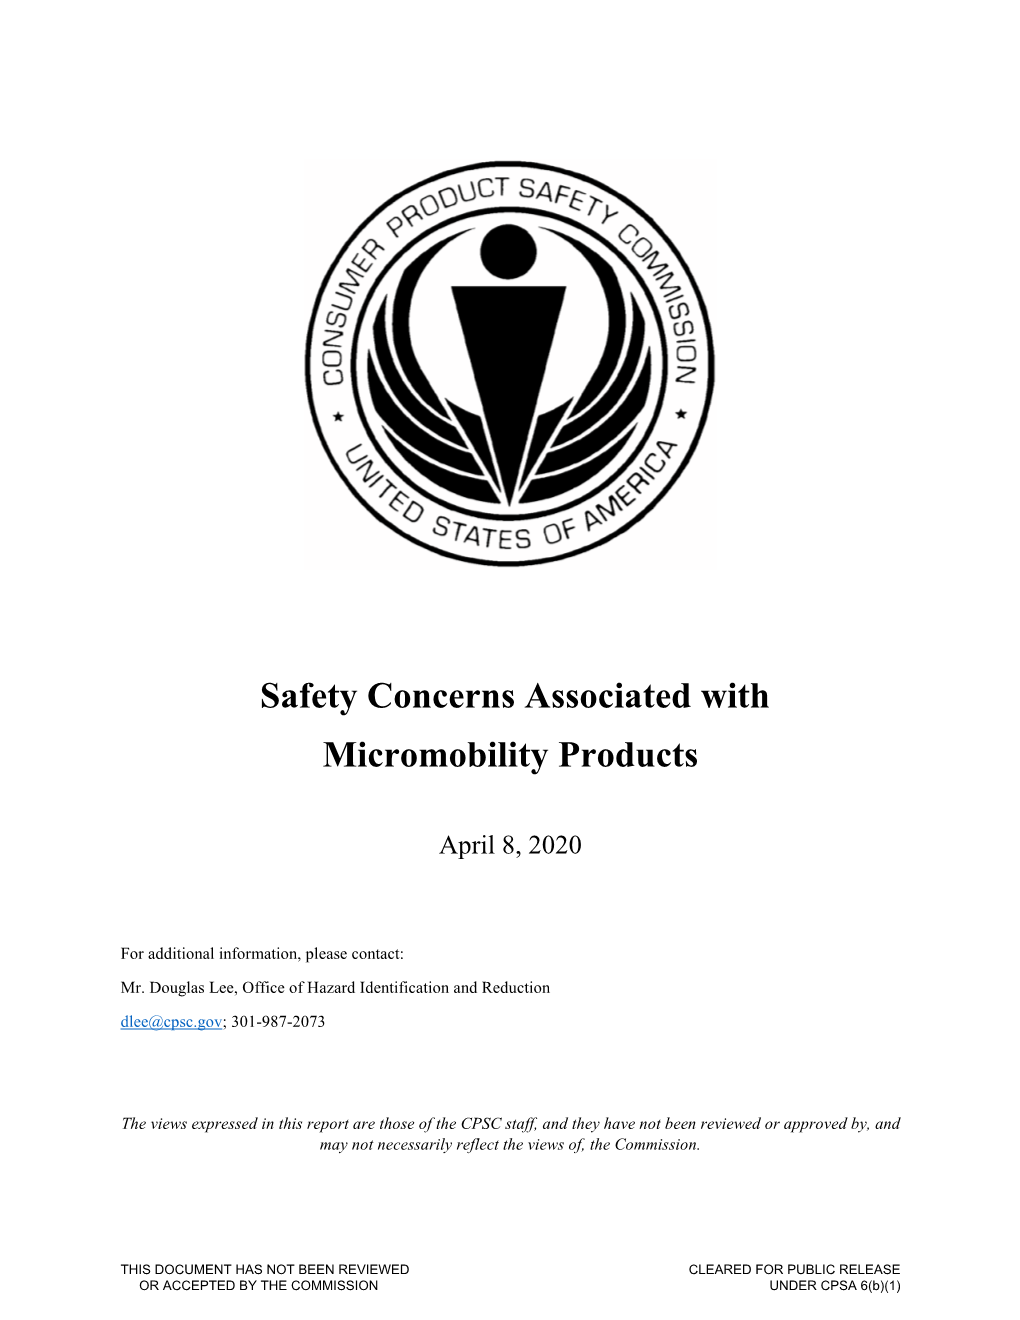 Safety Concerns Associated with Micromobility Products